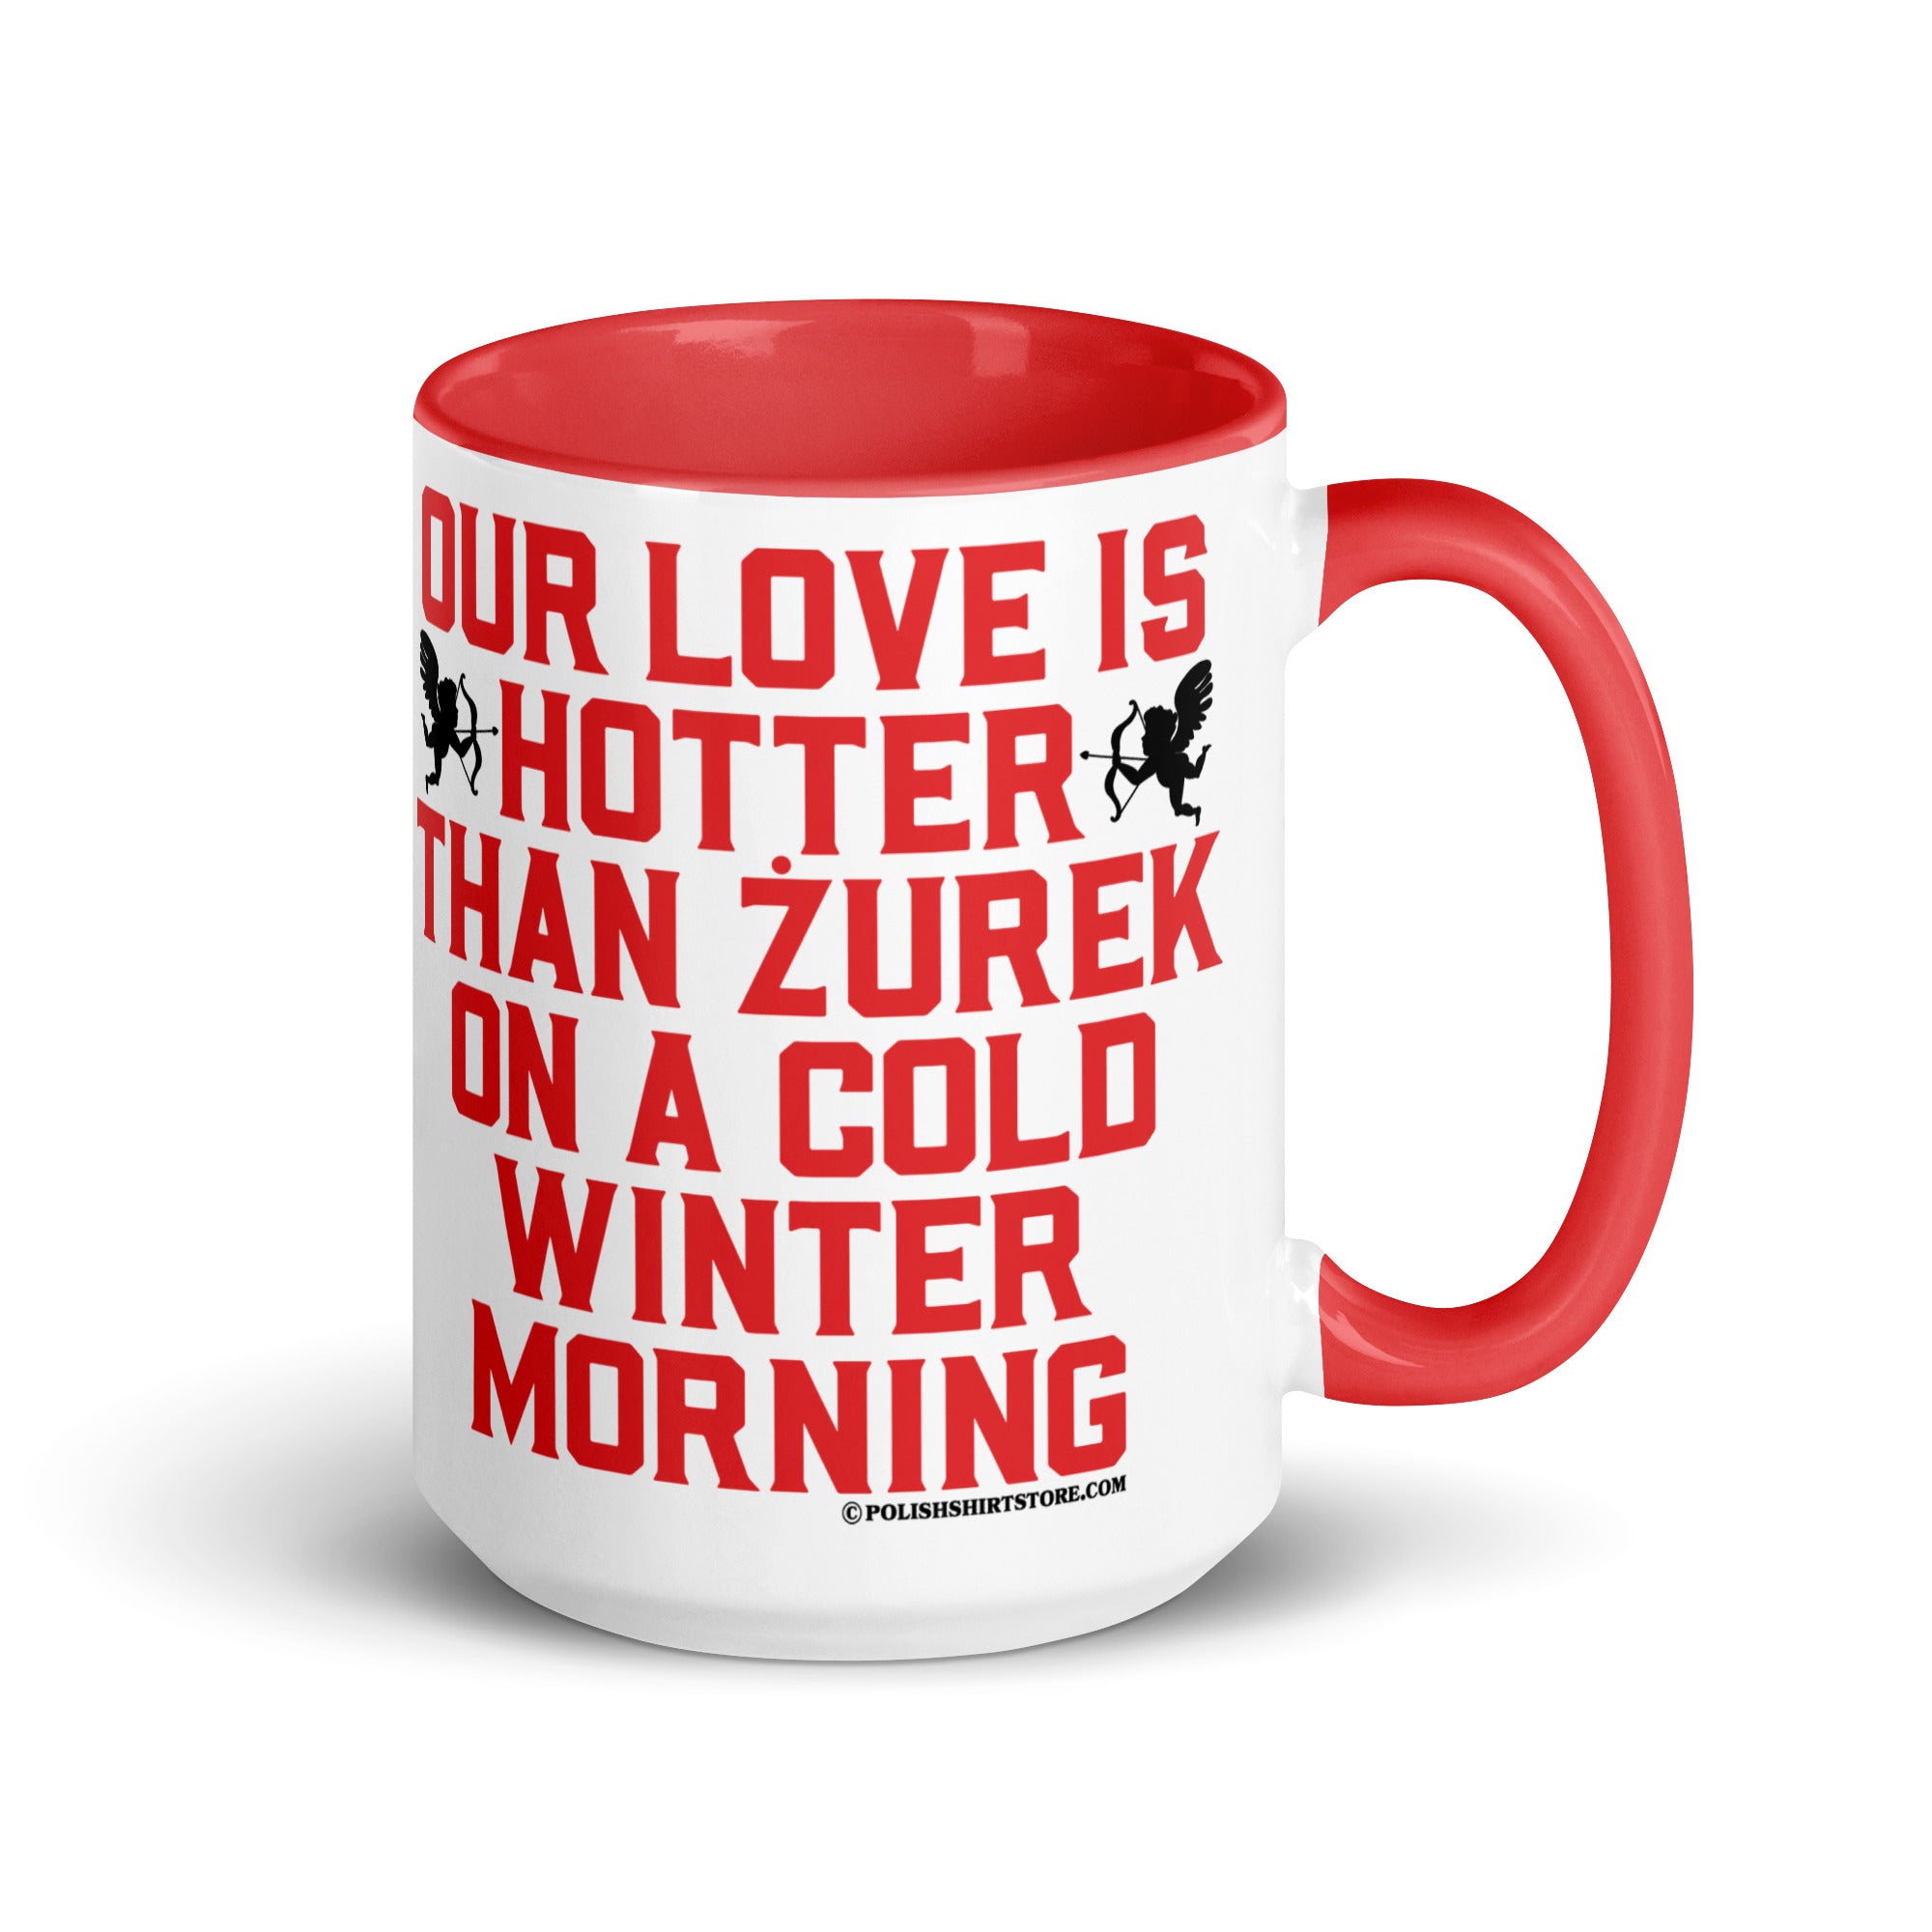 Our Love Is Hotter Than Zurek On A Cold Winter Morning Coffee Mug with Color Inside  Polish Shirt Store Red 15 oz 